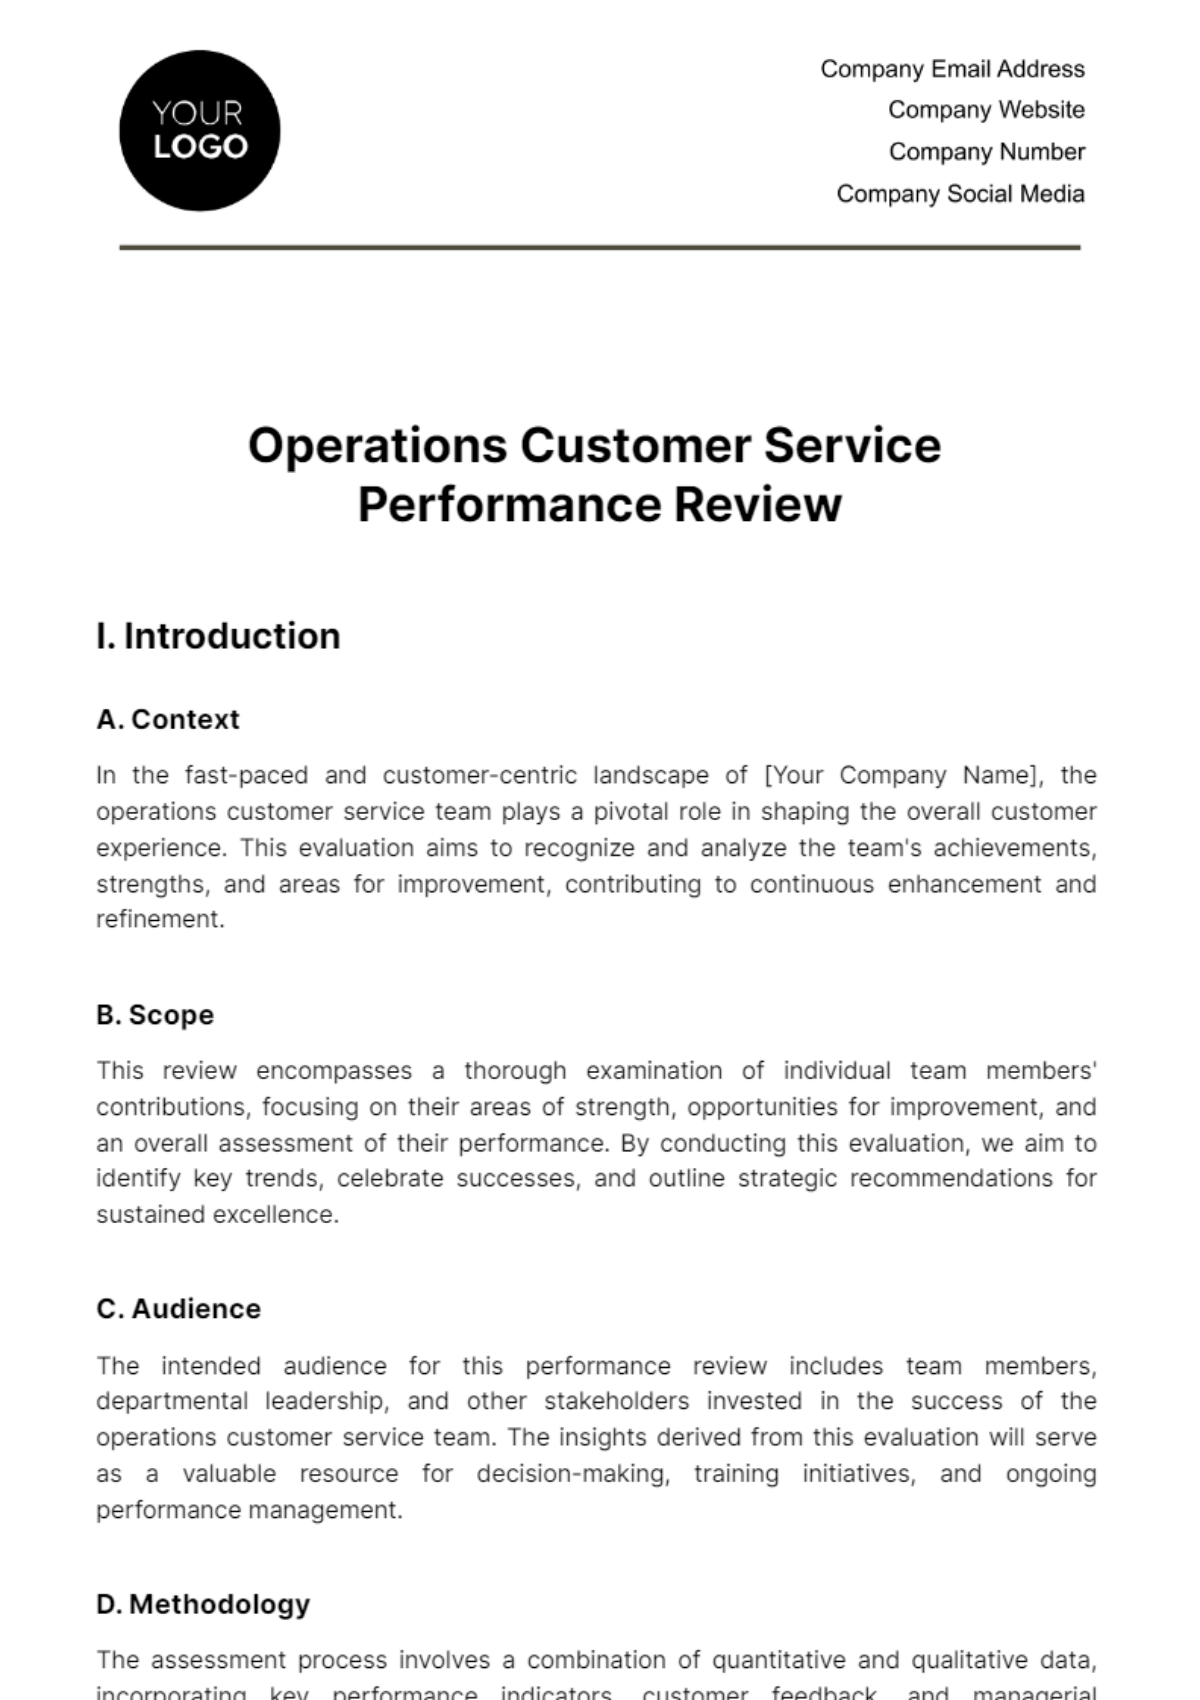 Operations Customer Service Performance Review Template